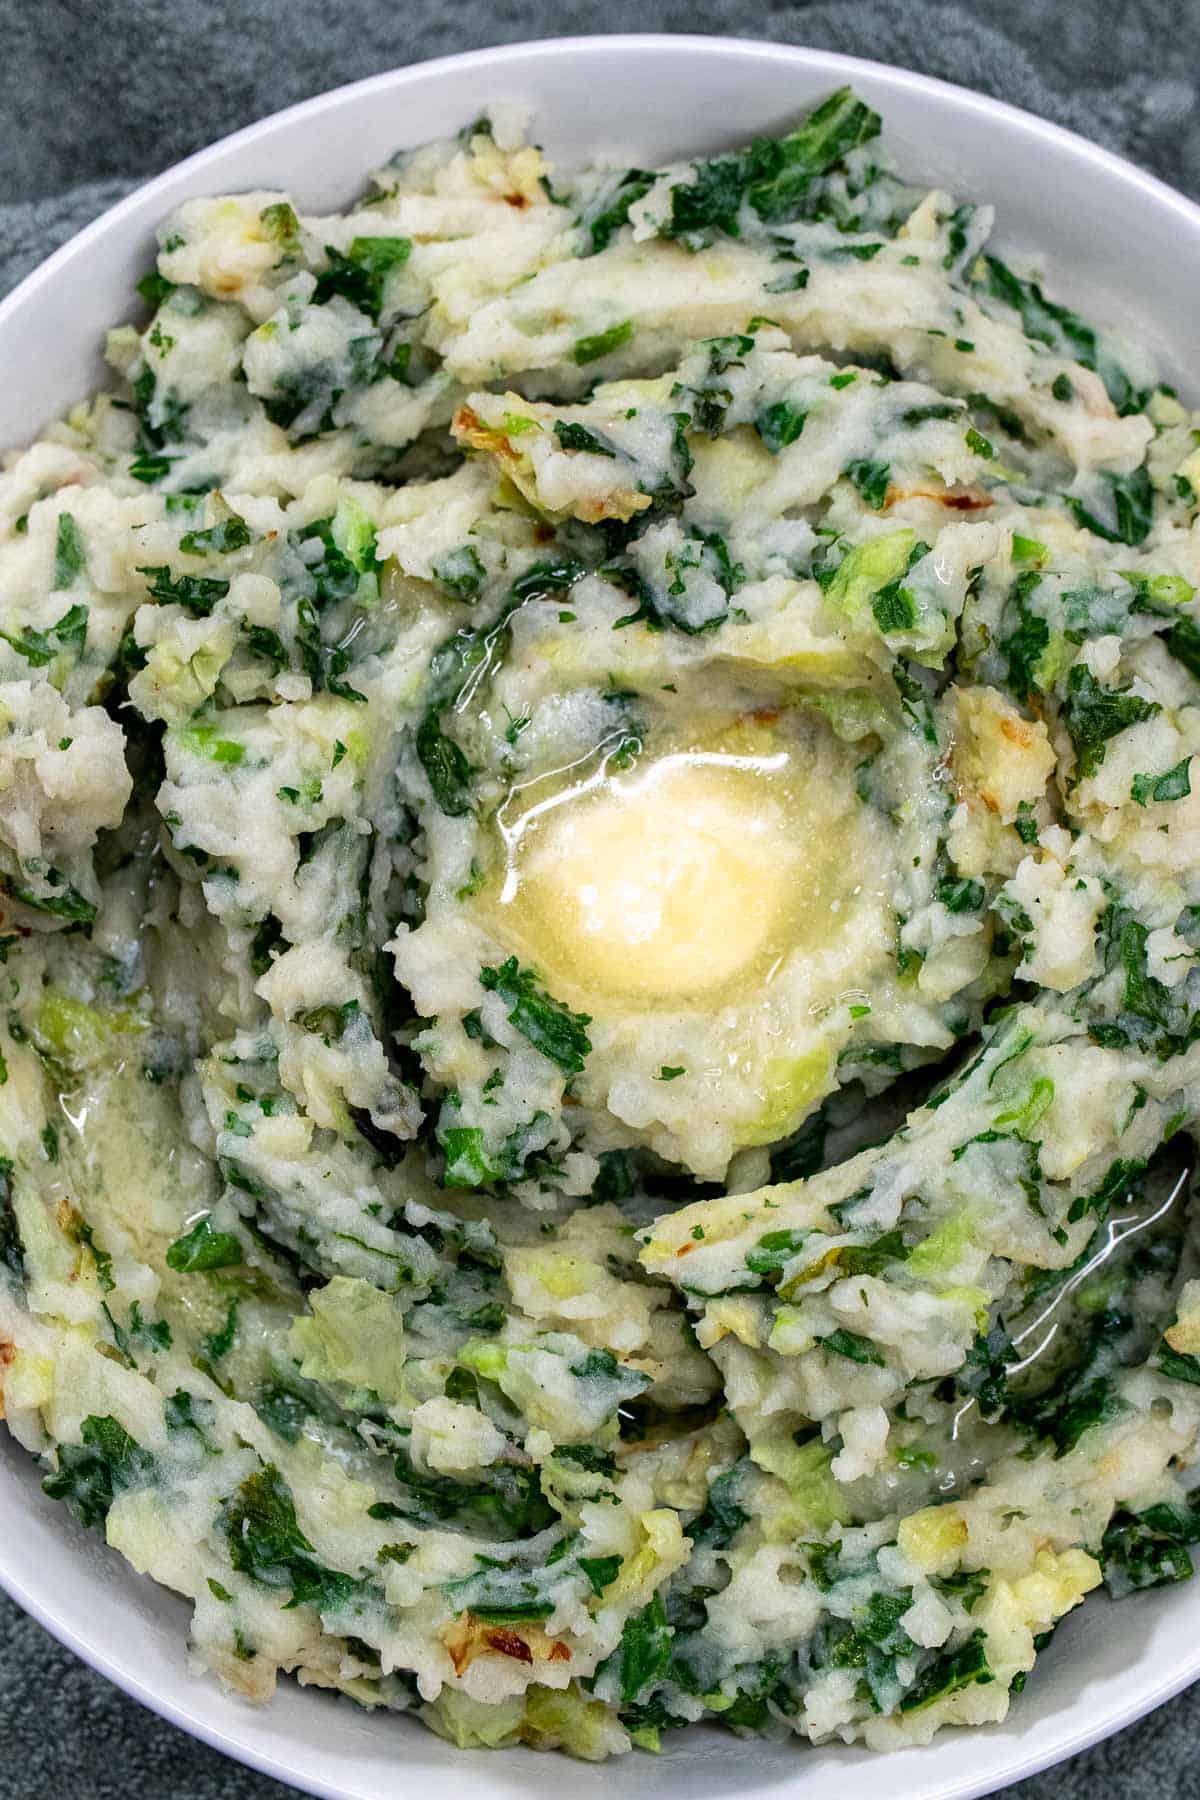 Overhead view of Irish colcannon in a bowl with a pool of butter in the center.